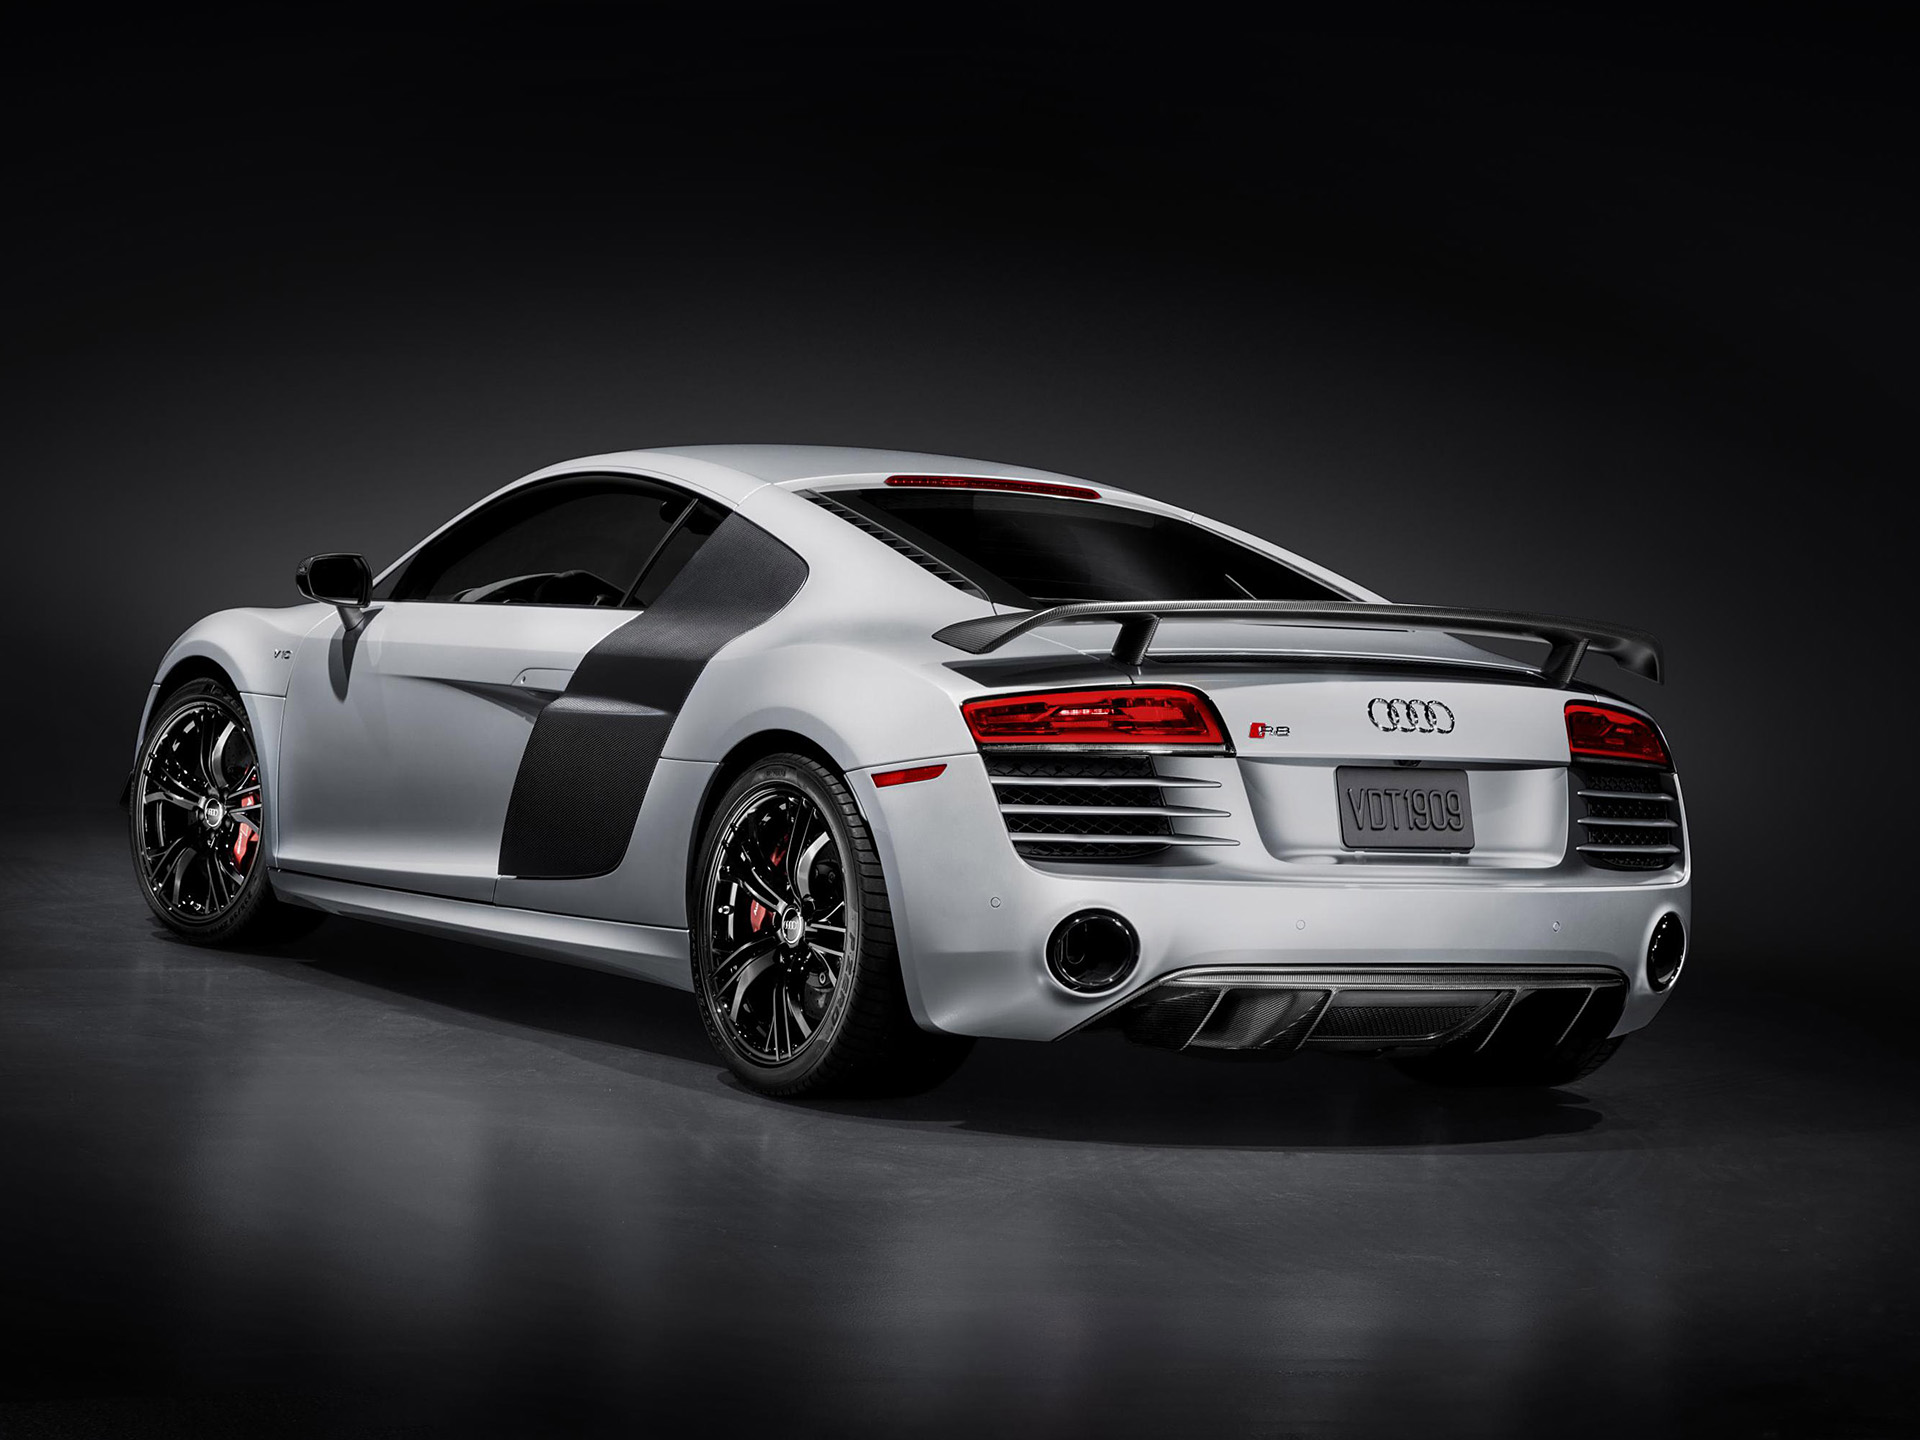  2015 Audi R8 Competition Wallpaper.